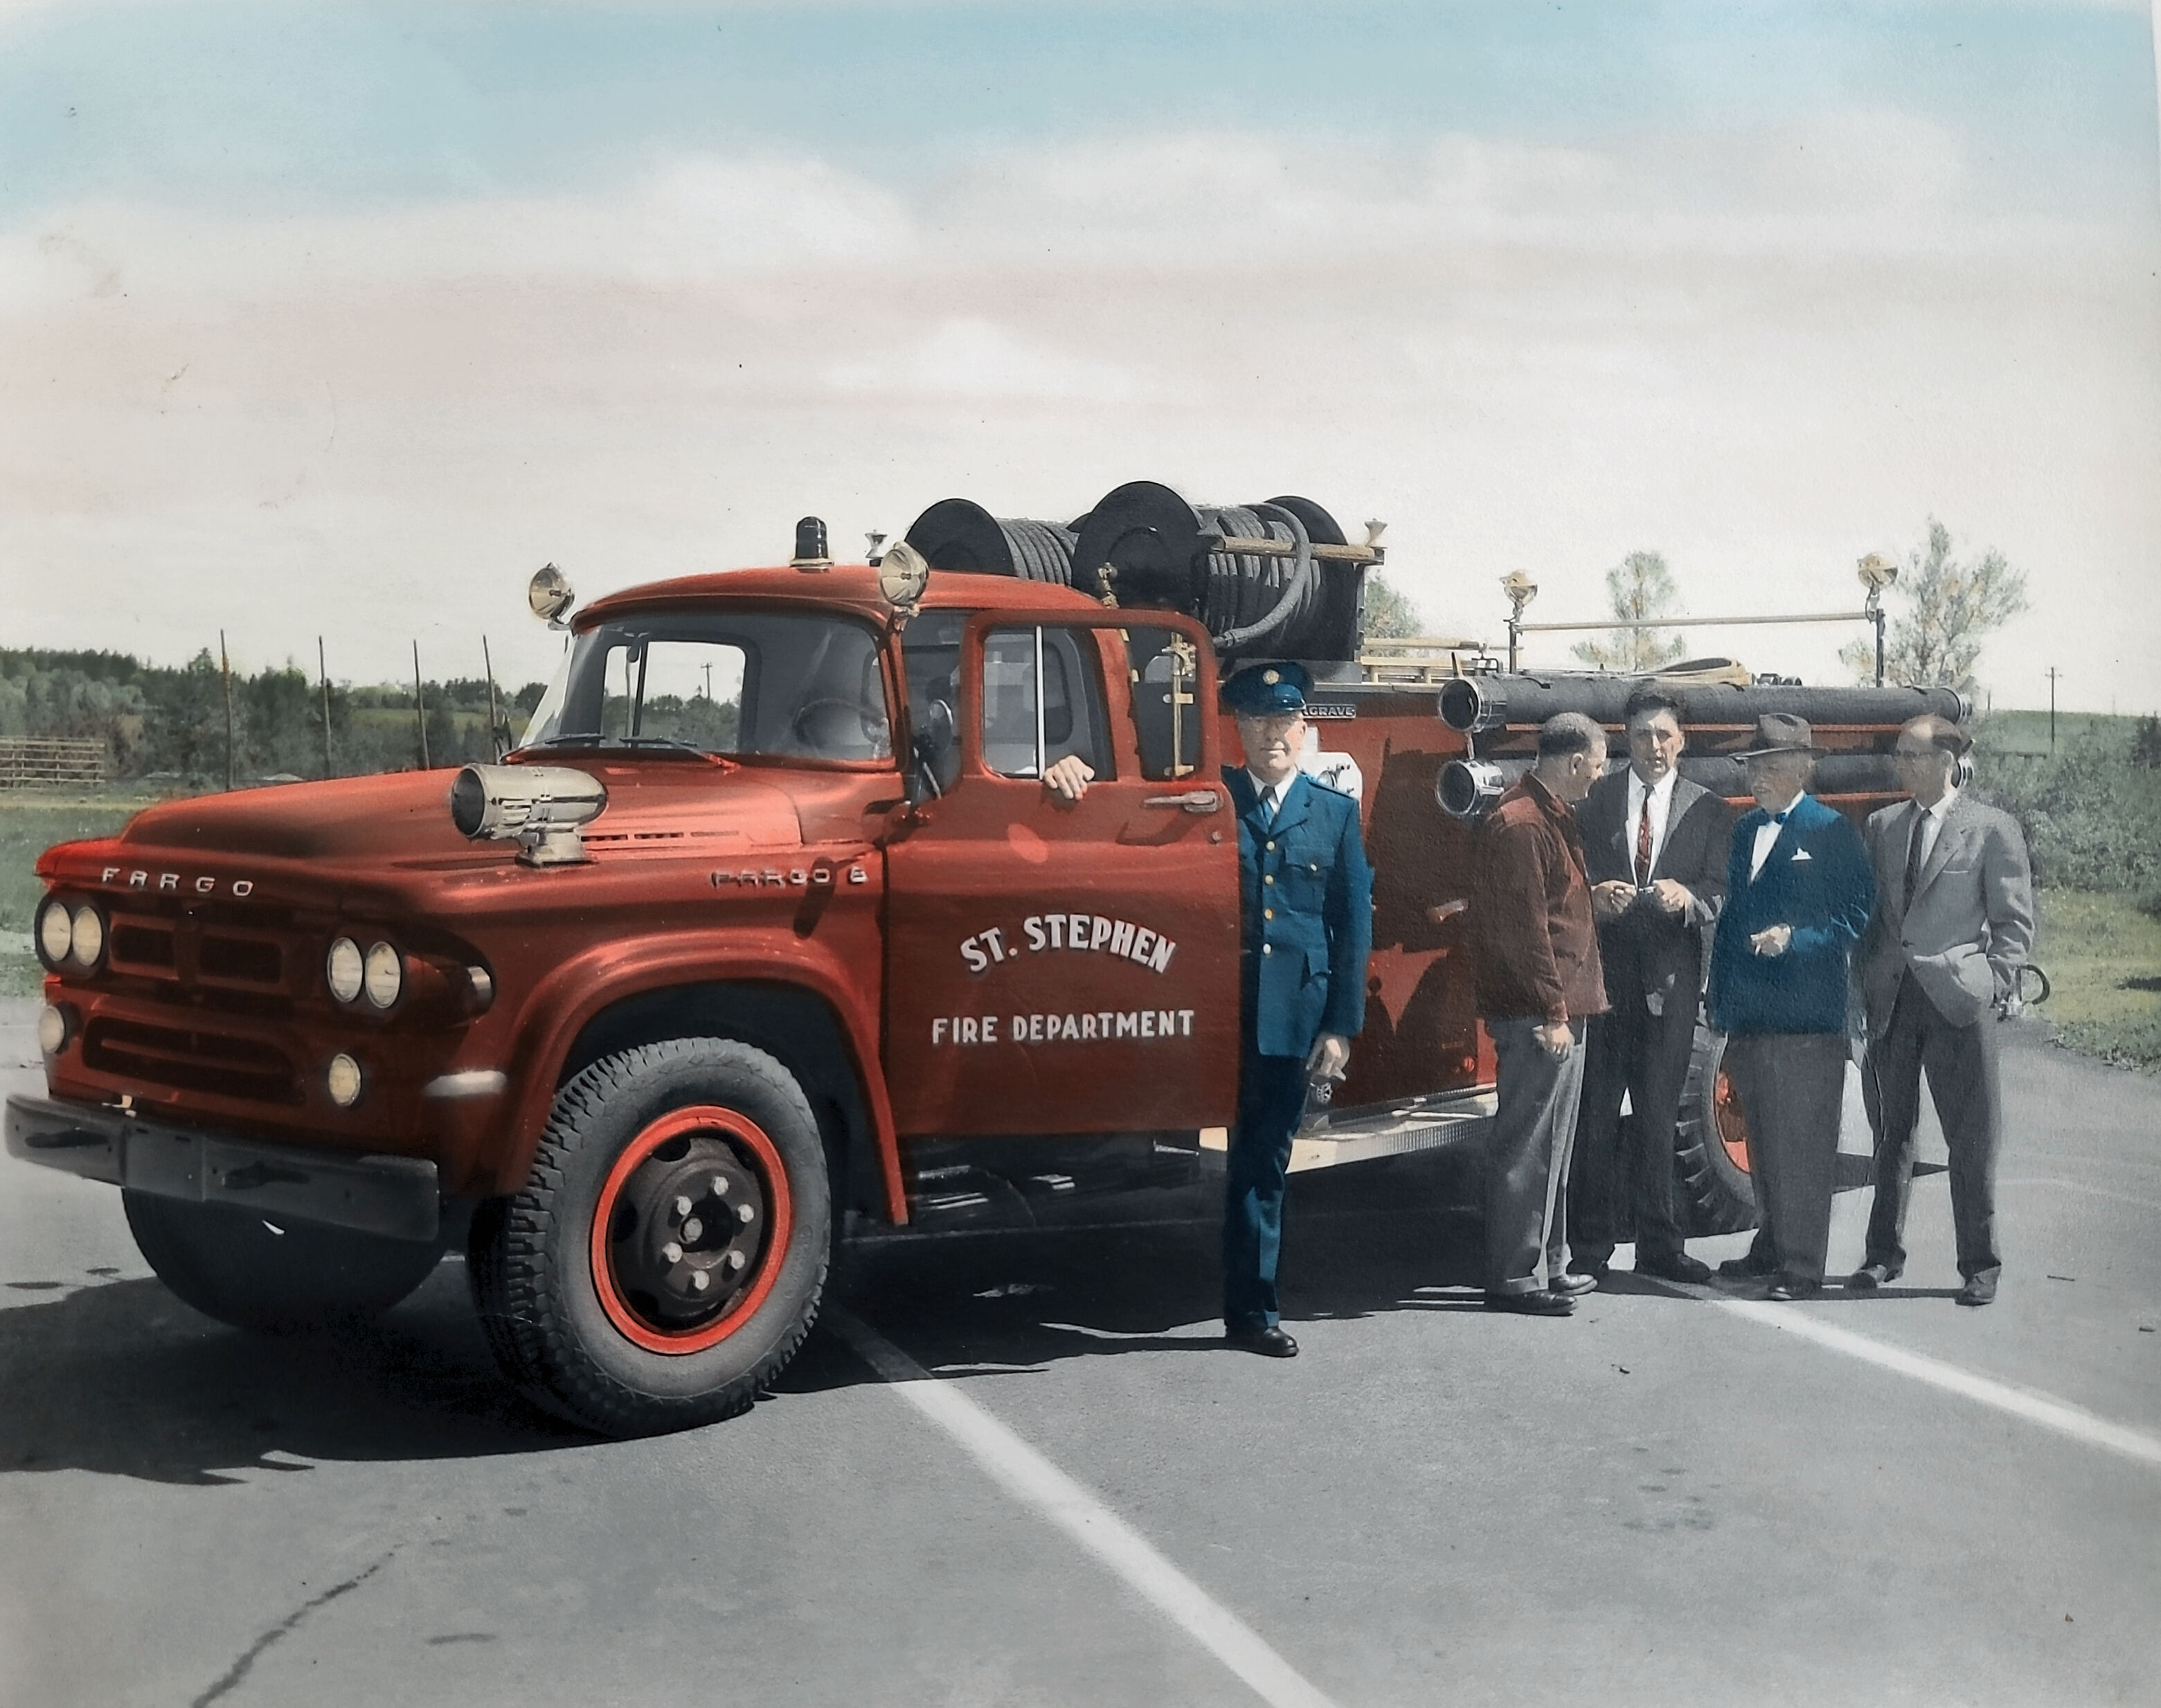 1957 - New fire truck for St. Stephen, NB, Canada. In the photo: Ray Burns, Driver. Jack Woodcock, Plymouth-Fargo Dealer, Raymond Day, Chairman of the Fire Committee. Carl Brown, Mayor. Stan Smythe, Councilor, Fire & Police. Committee